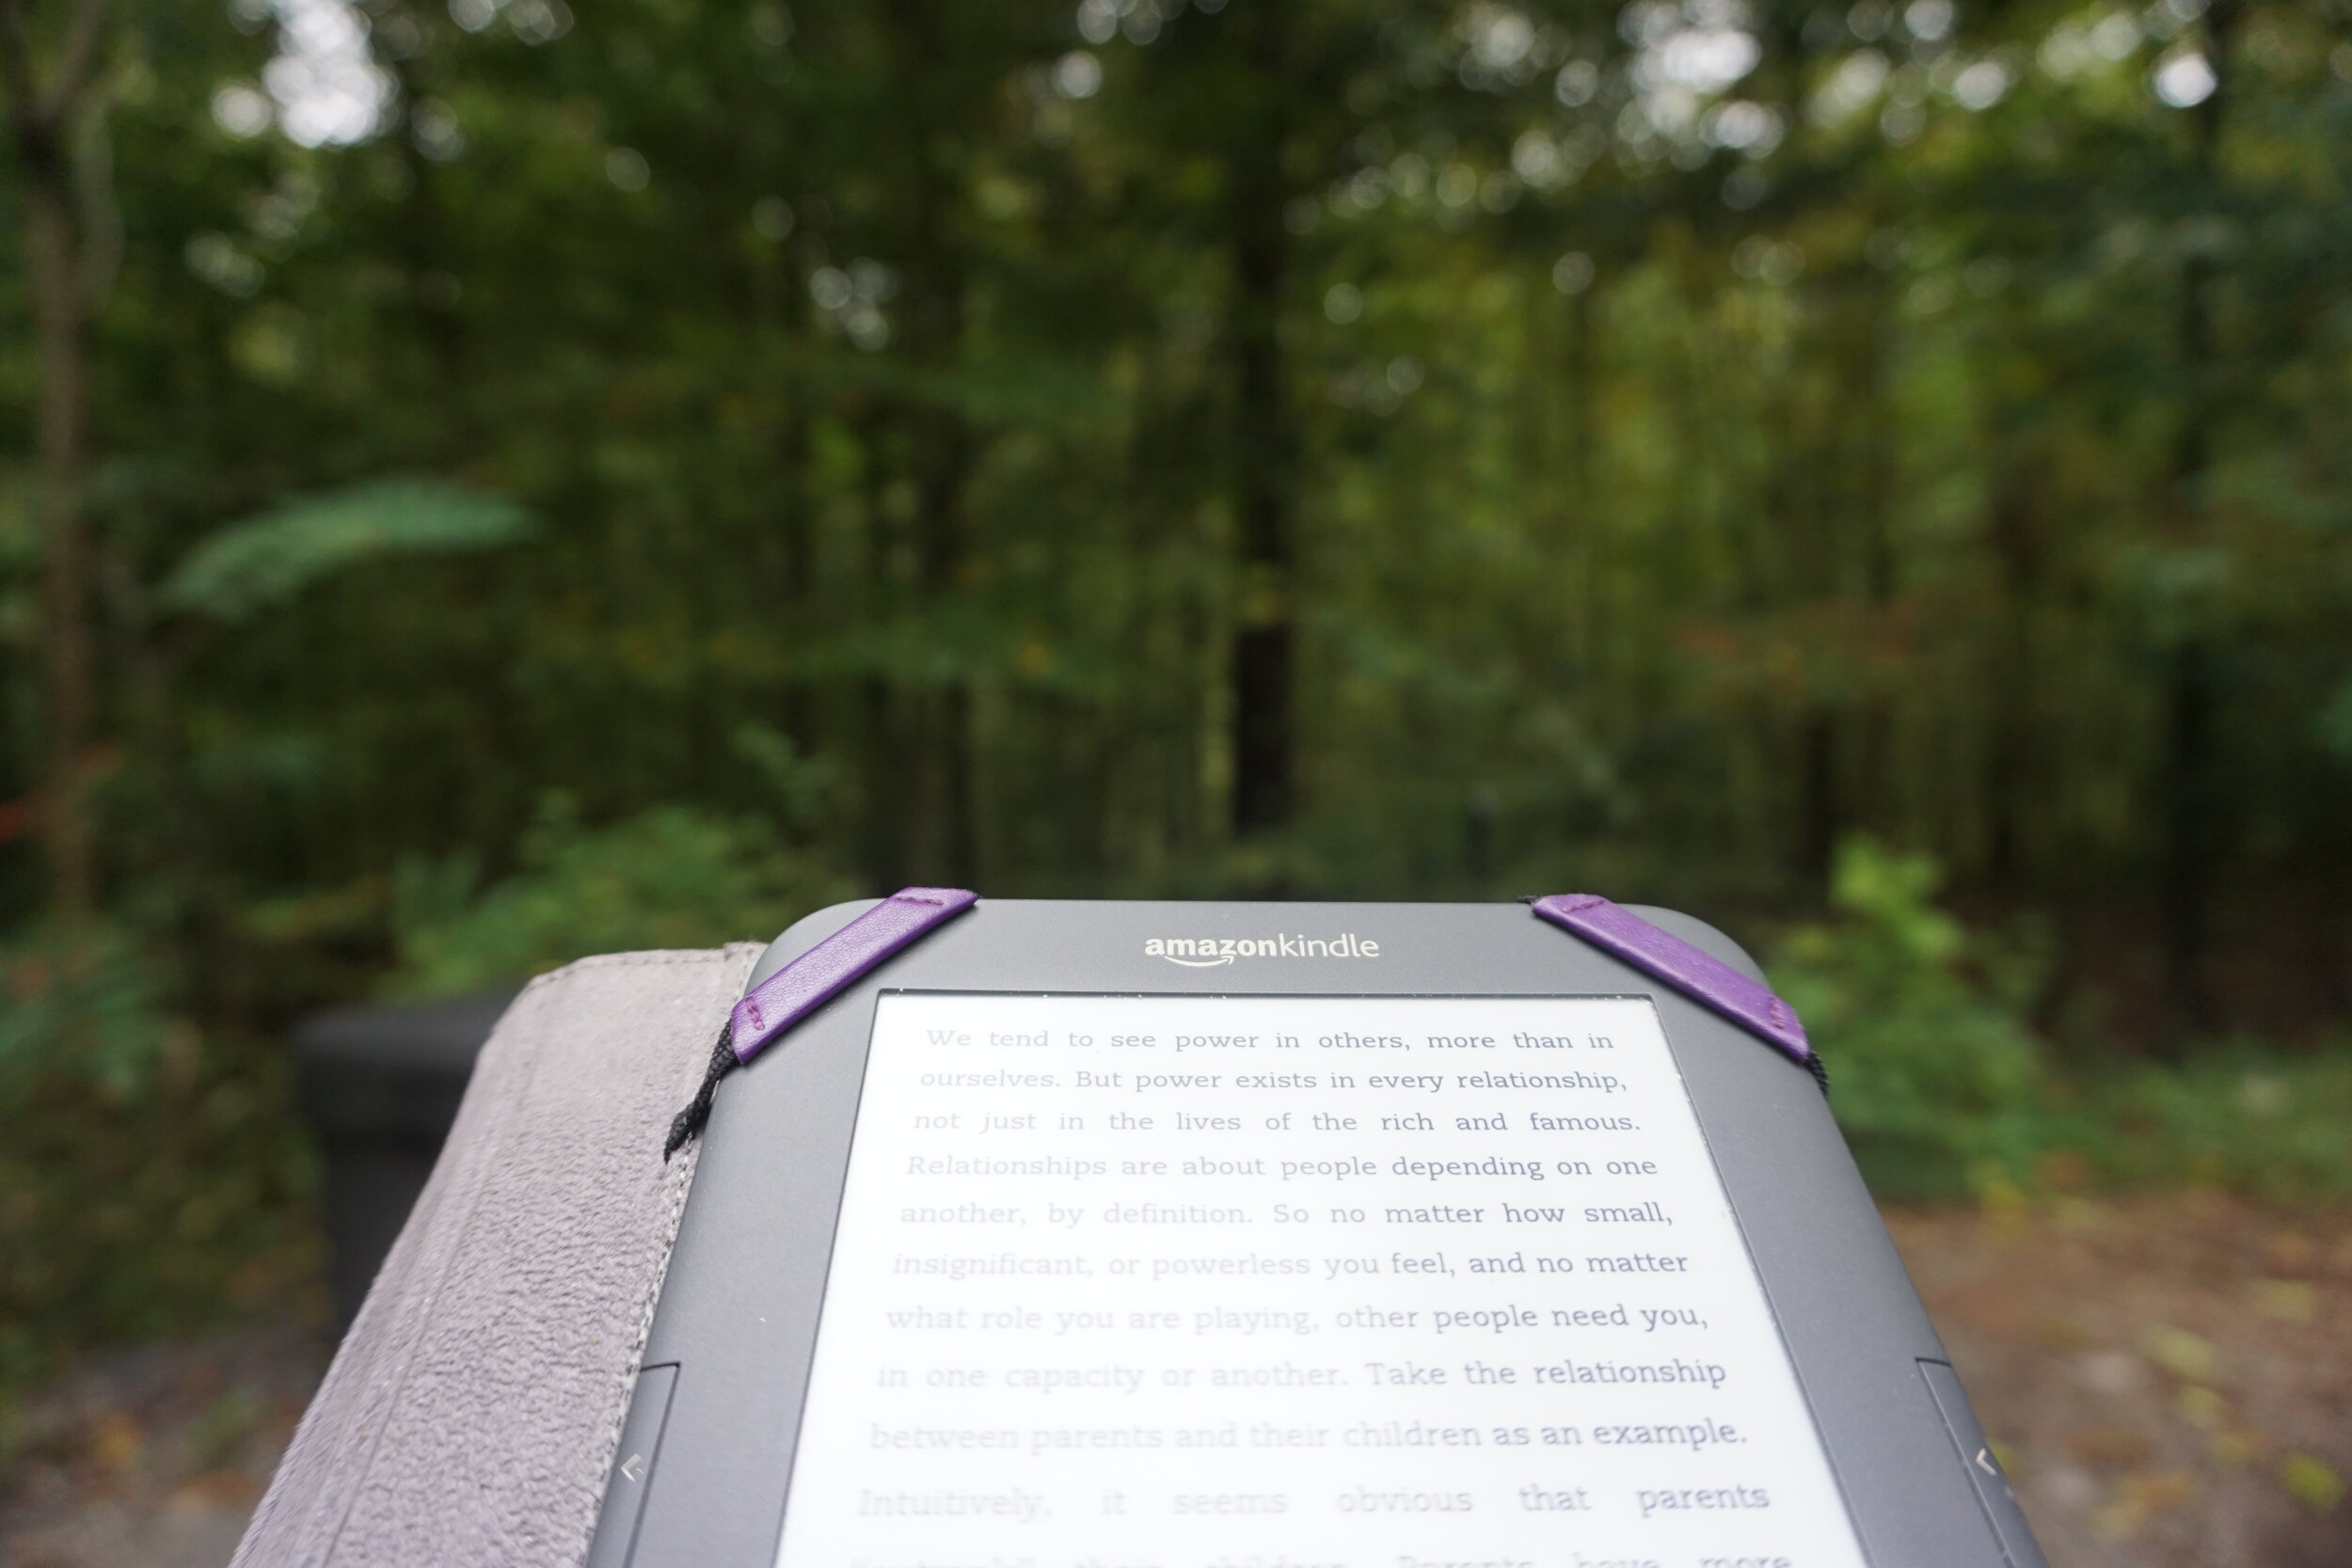 An Amazon Kindle and the woods in the background